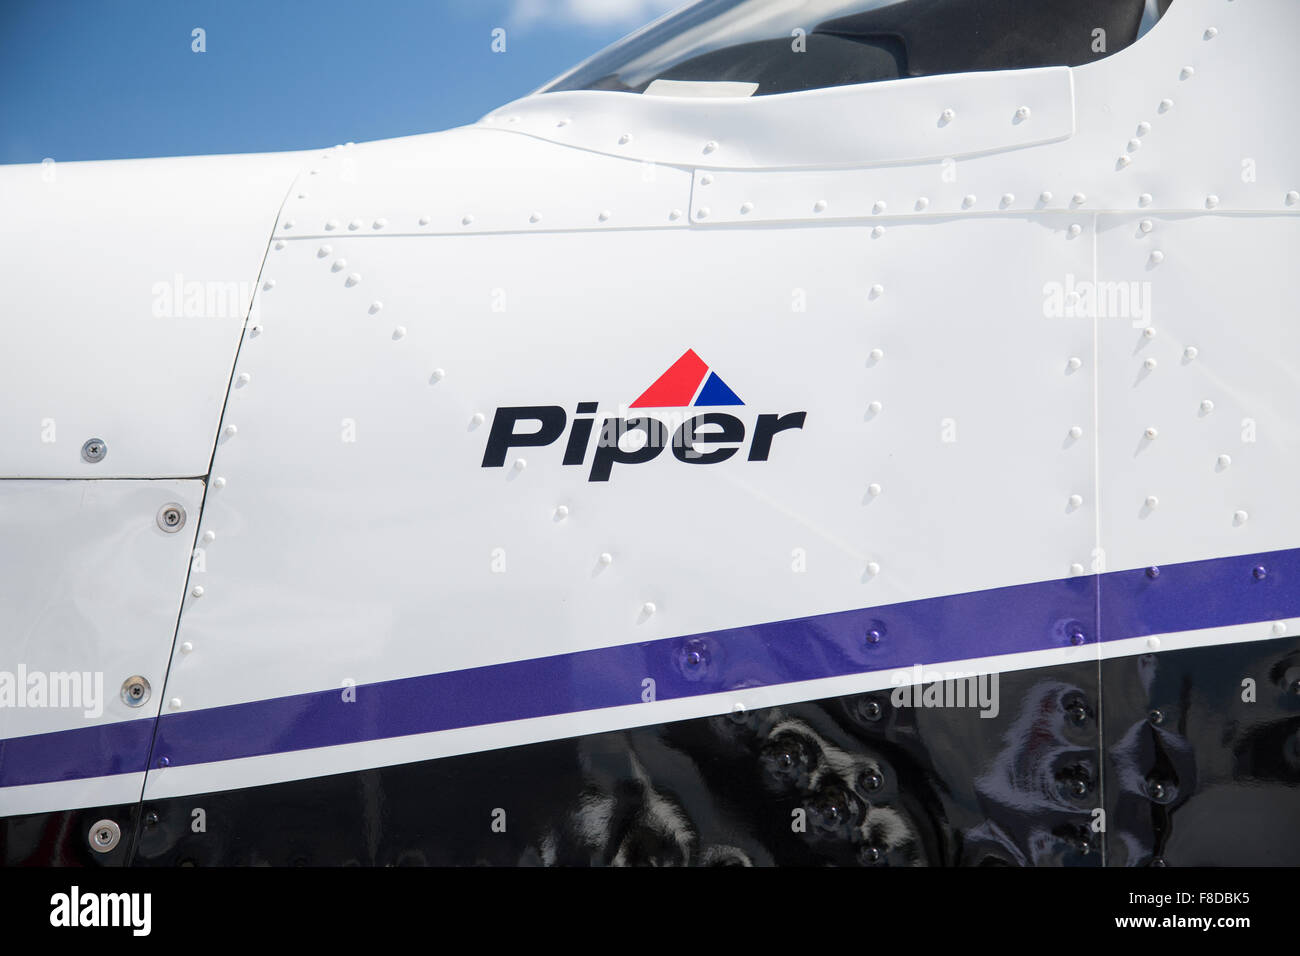 Piper Airplane logo on the side of an airplane Stock Photo